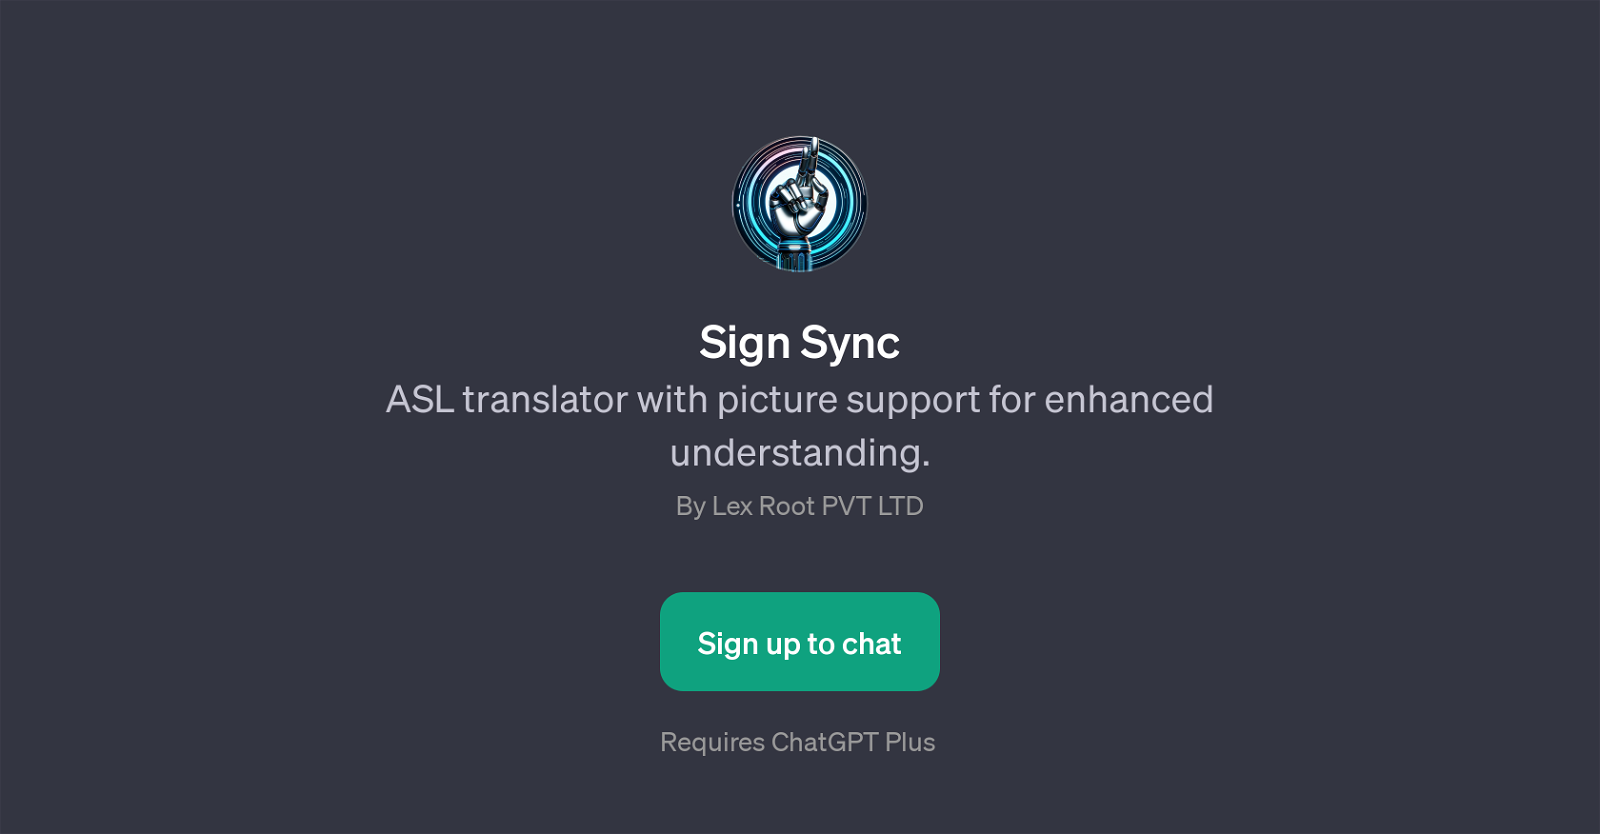 Sign Sync website